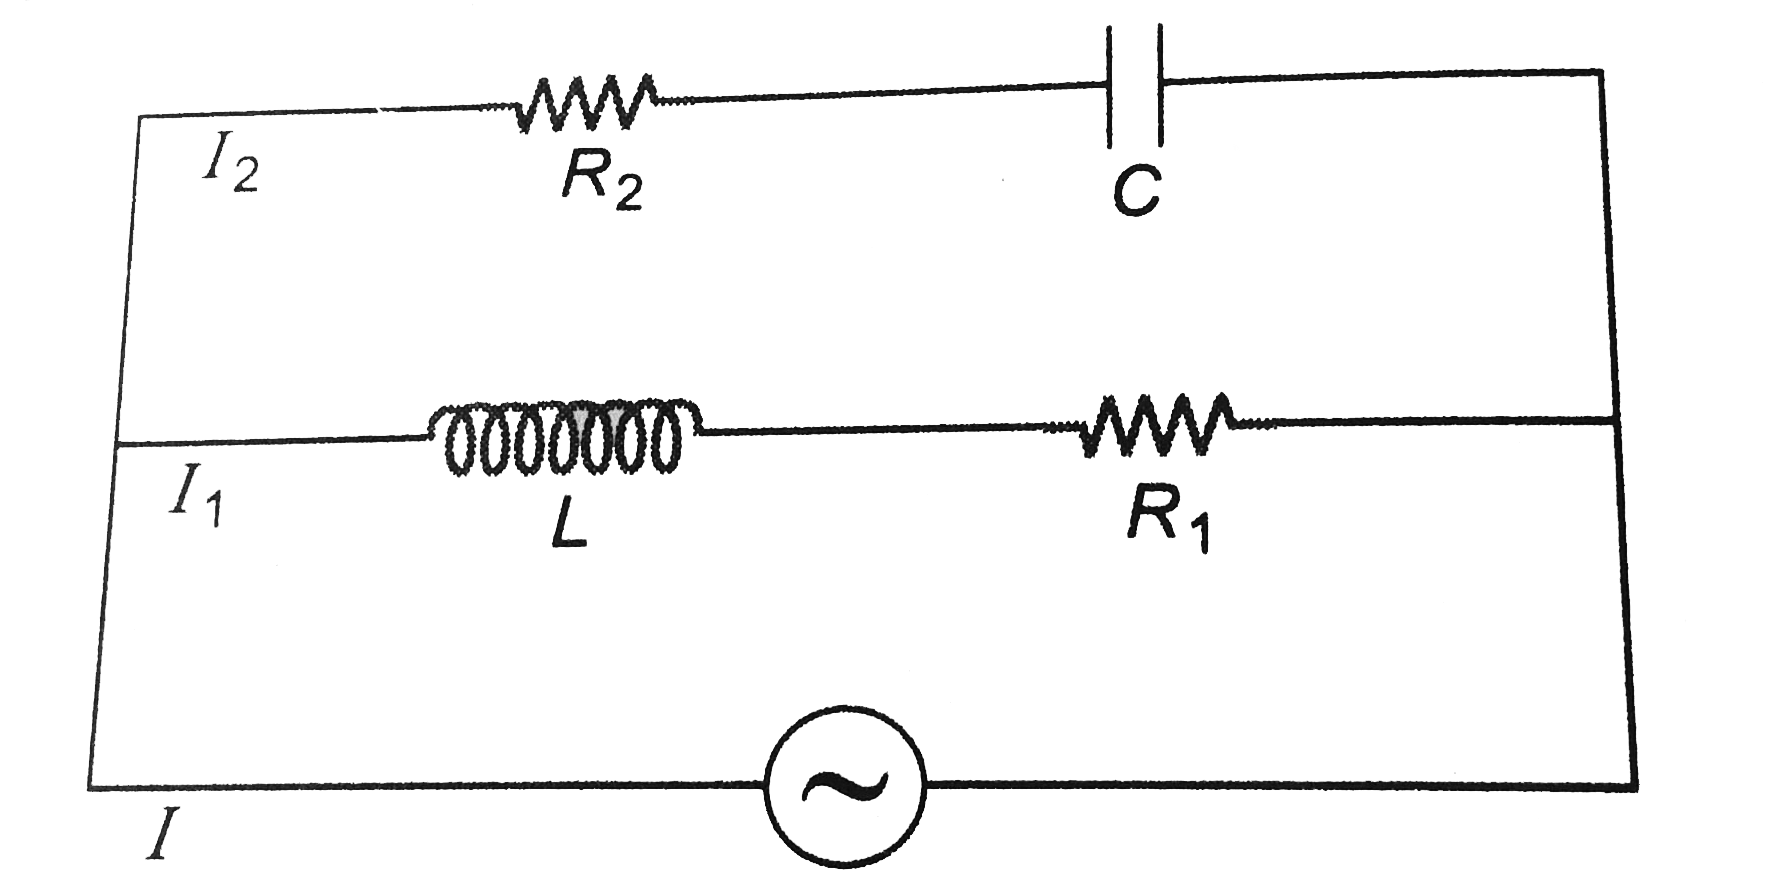 In the circuit shown in figure      R1=30Omega, R2=40 Omega, L=0.4H and C=1/3mF.   Find seven function of time I, I1, I2, V(R1), VL, V(R2) and VC. Also total power consumed in the circuit. In the given potential function V is in volts and omega in rad//s.